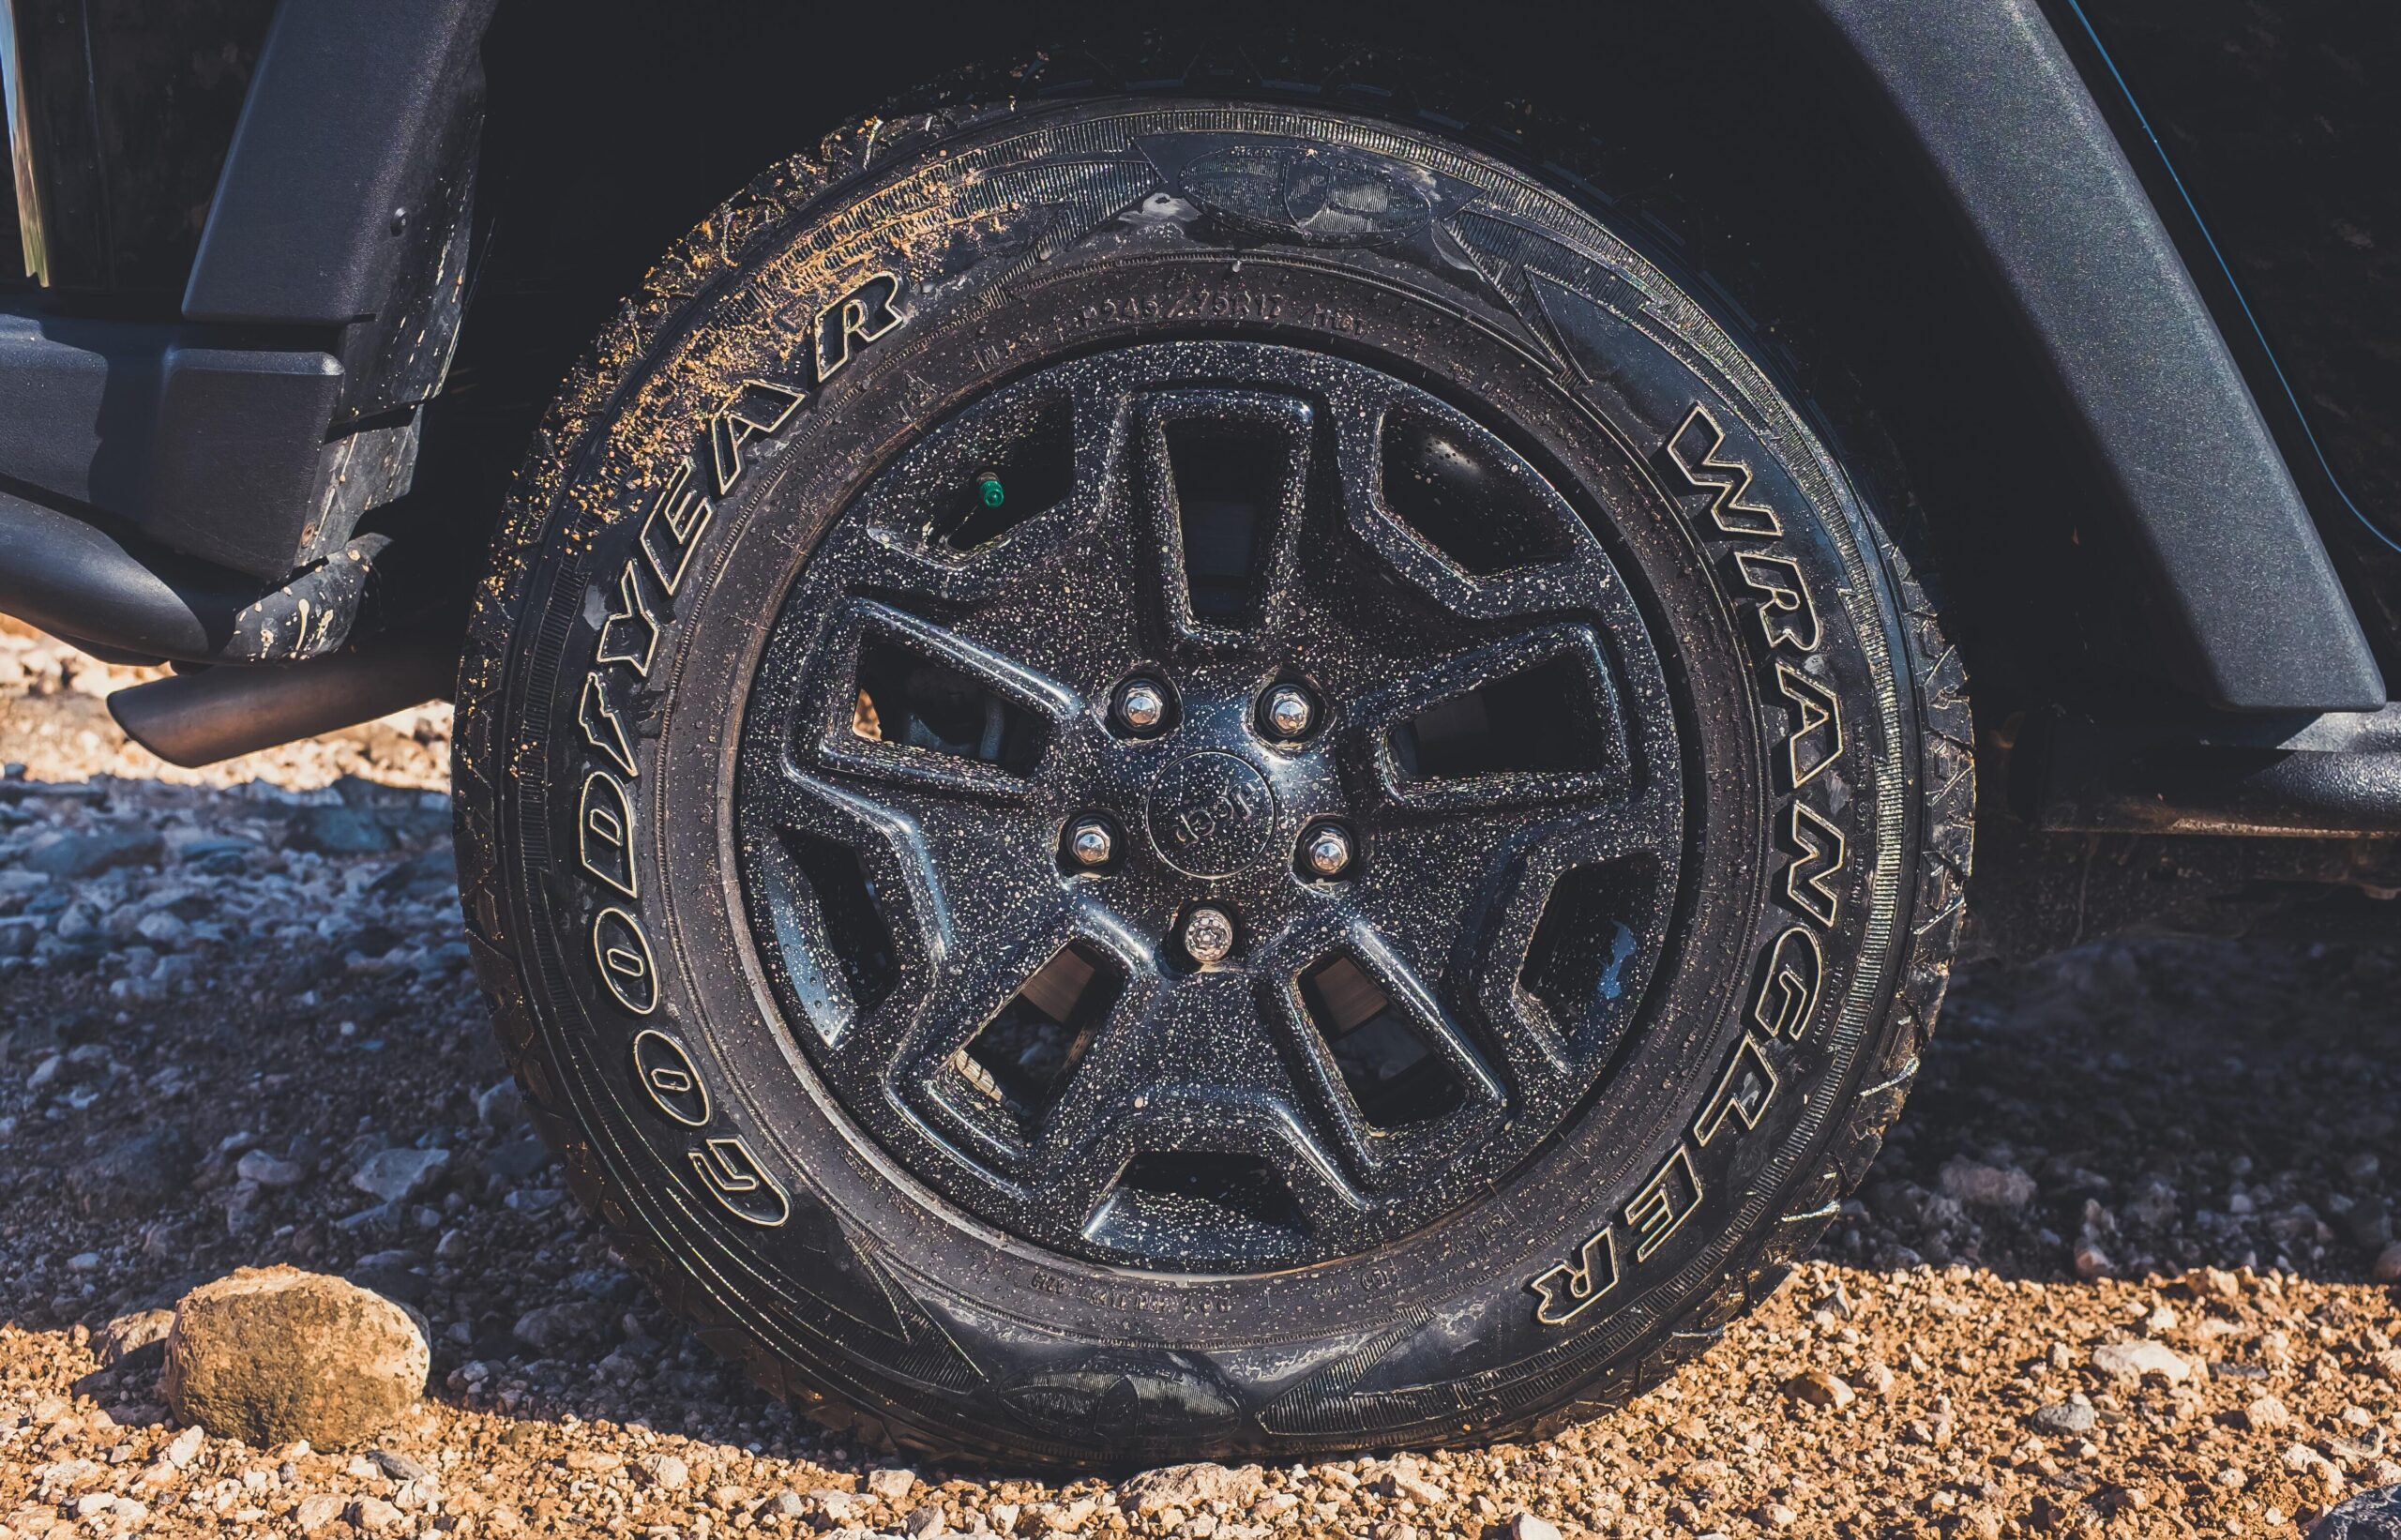 A black tire, the best for snow all-terrain tire